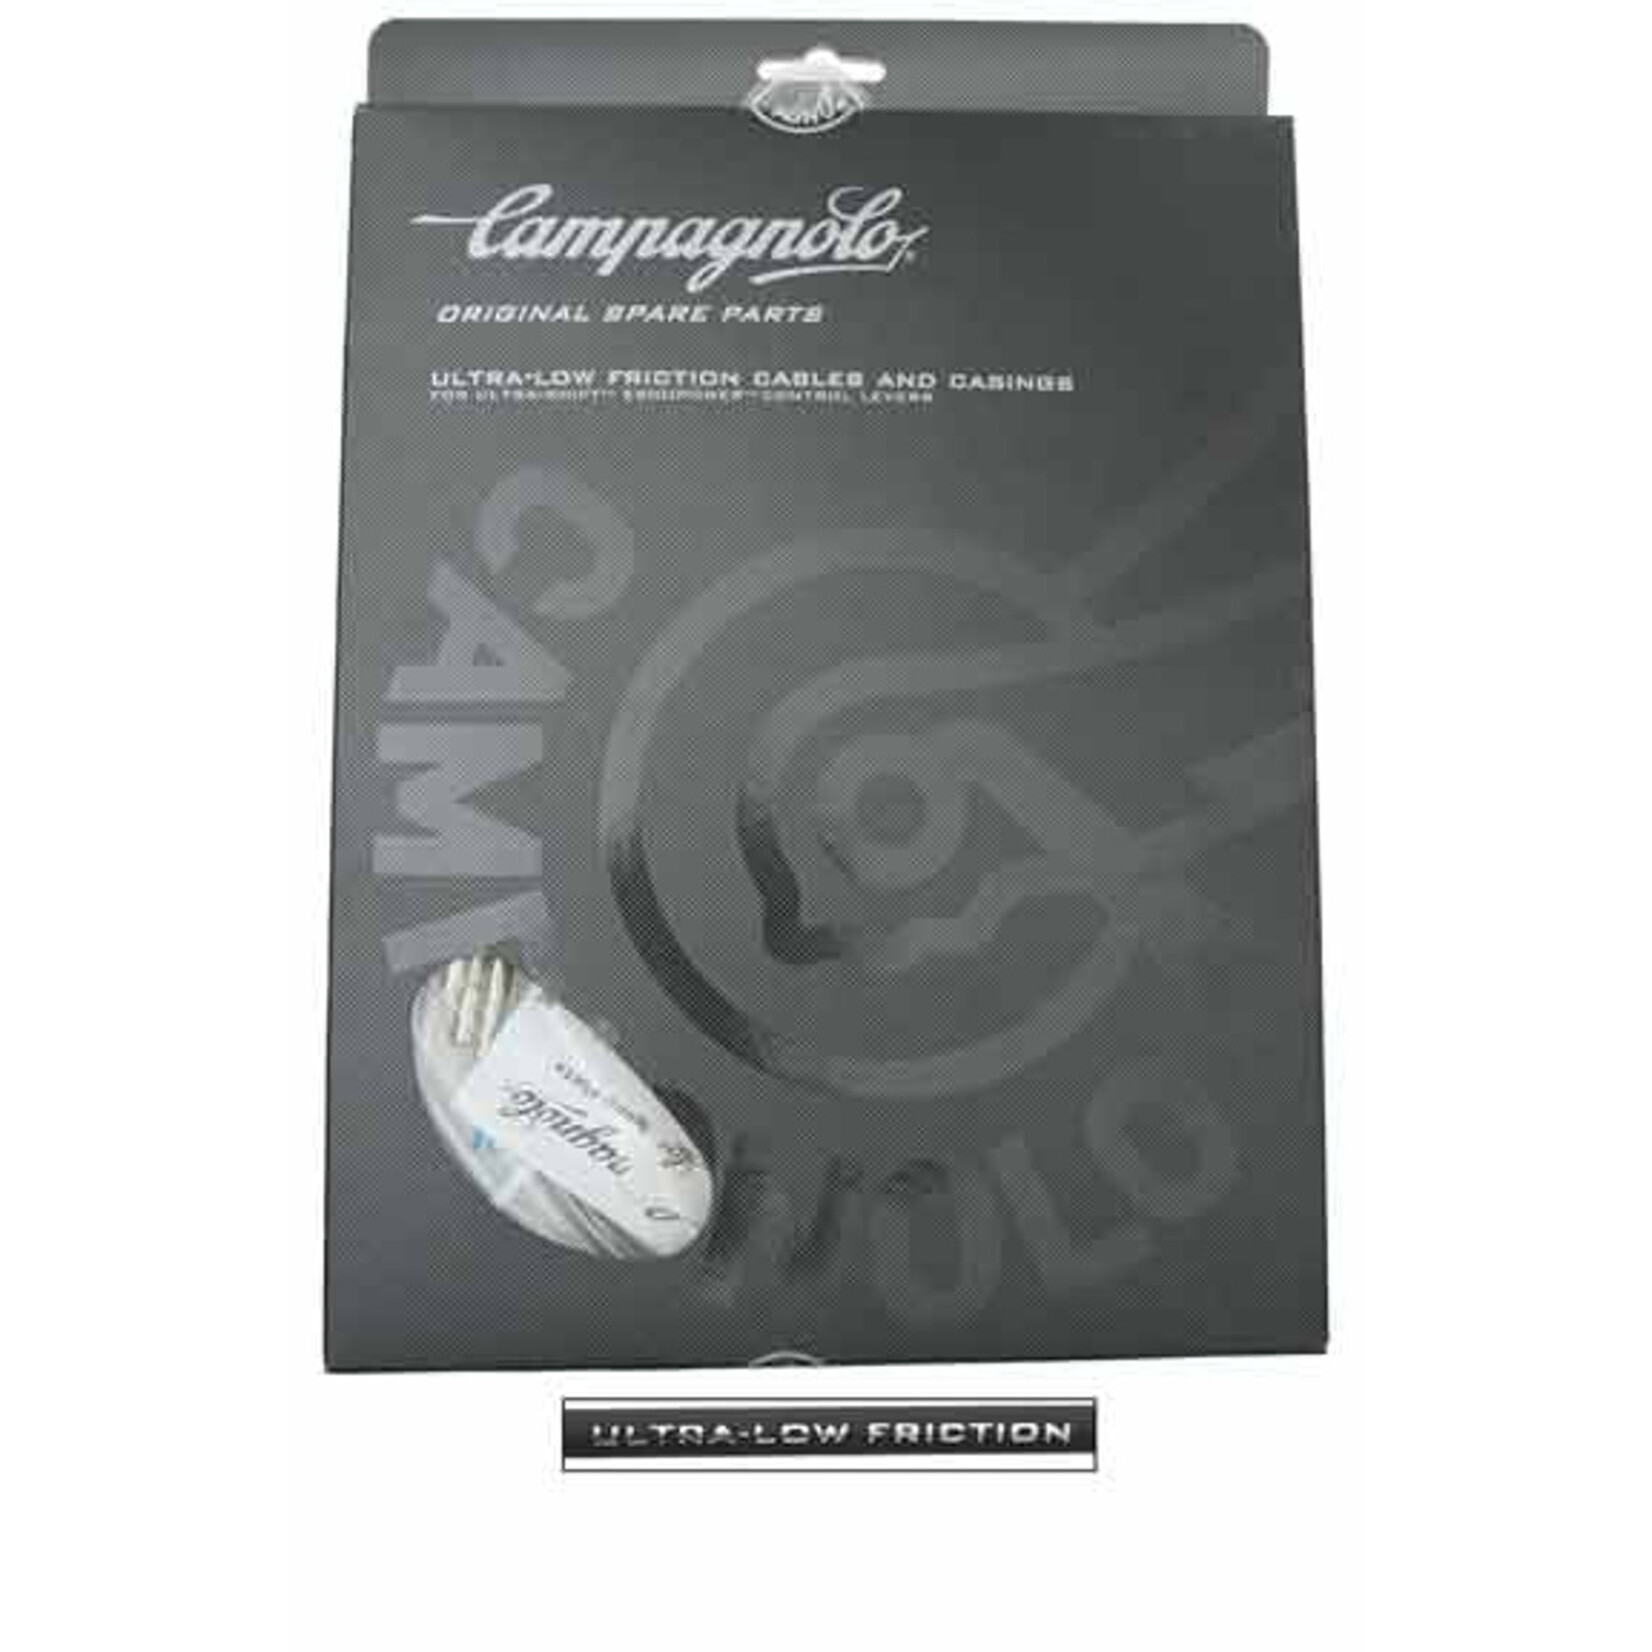 Campagnolo Campagnolo Ultra Low Friction Cable and Housing Set for Brakes and Derailleurs Black